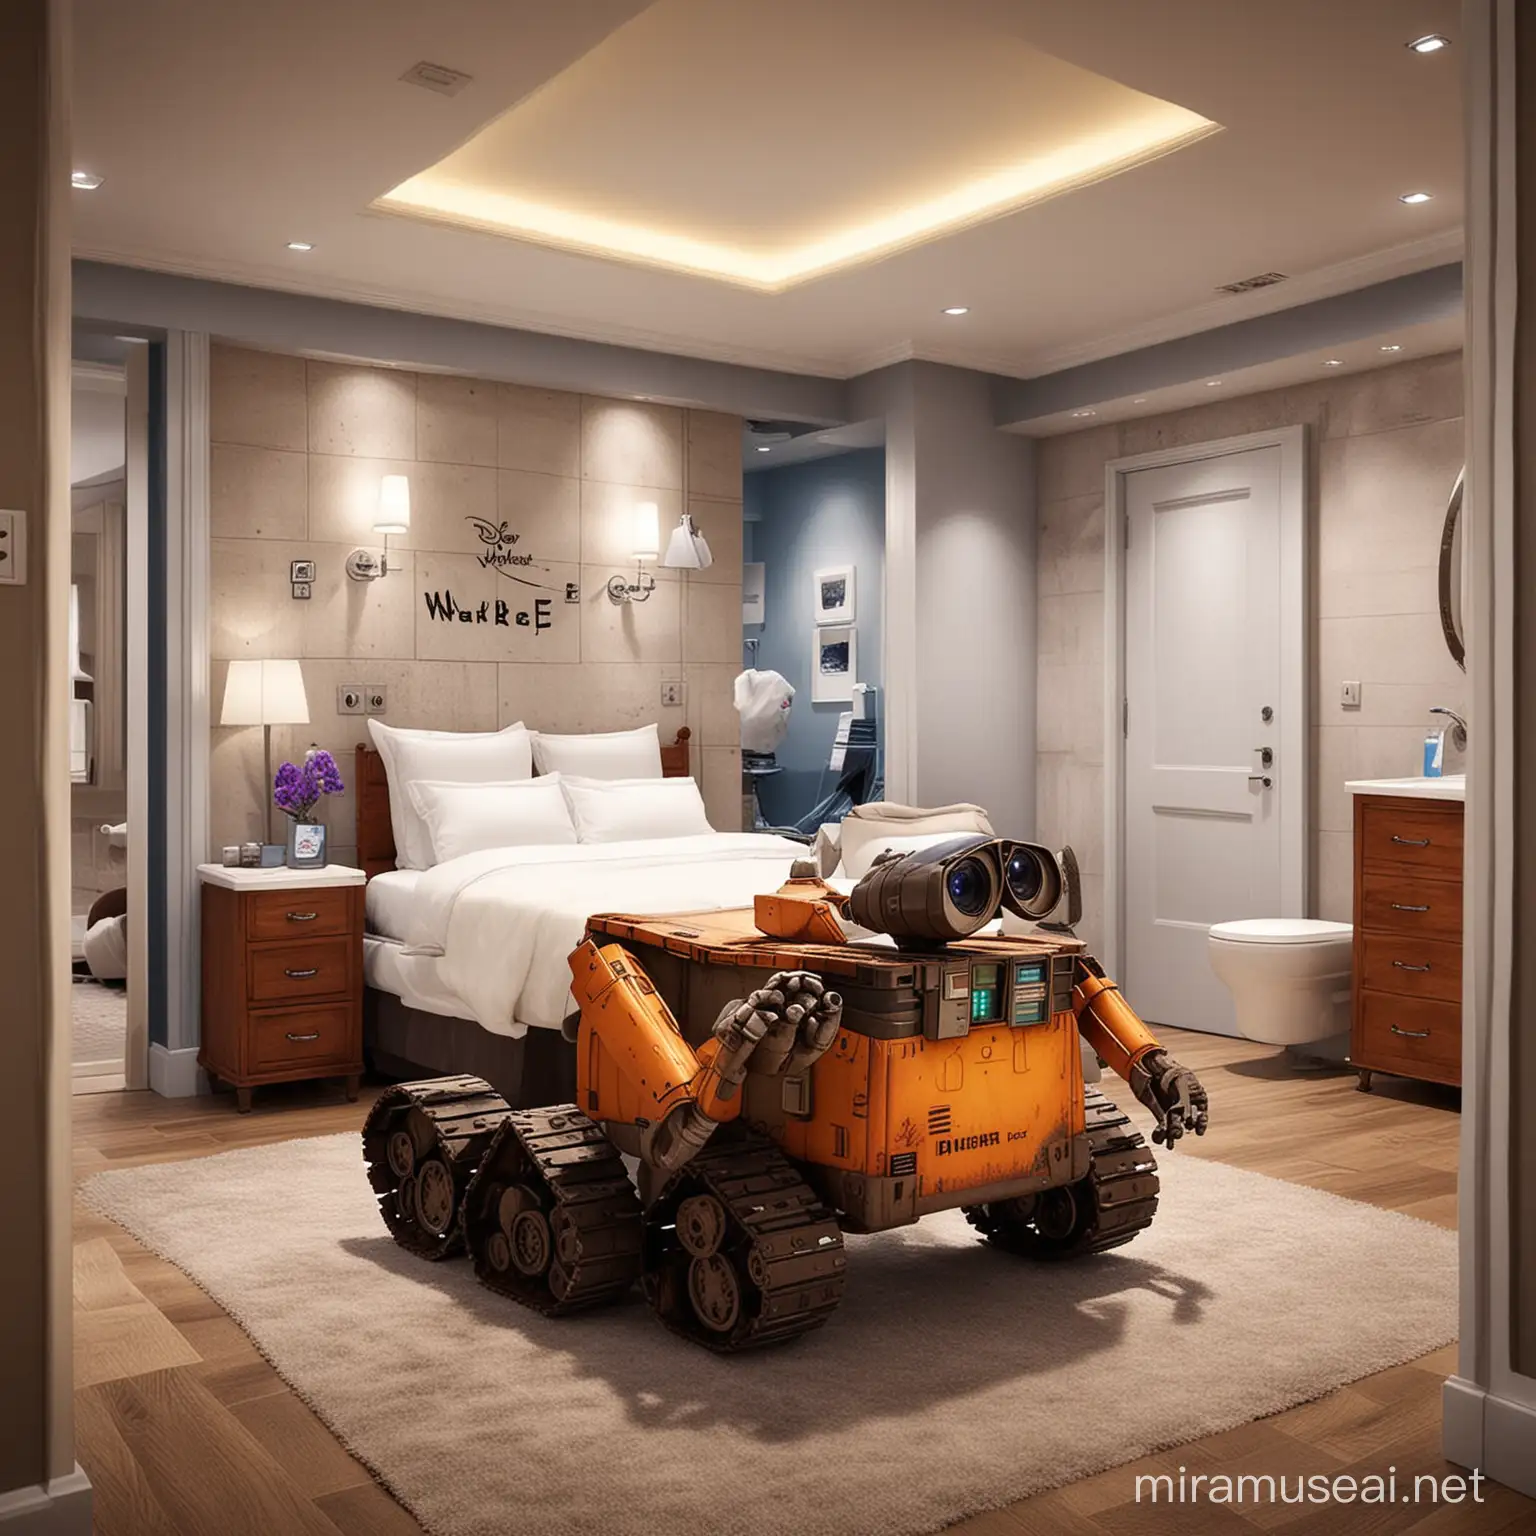 Luxurious WallE Themed Hotel Room with Bed Bathroom and Dressing Room